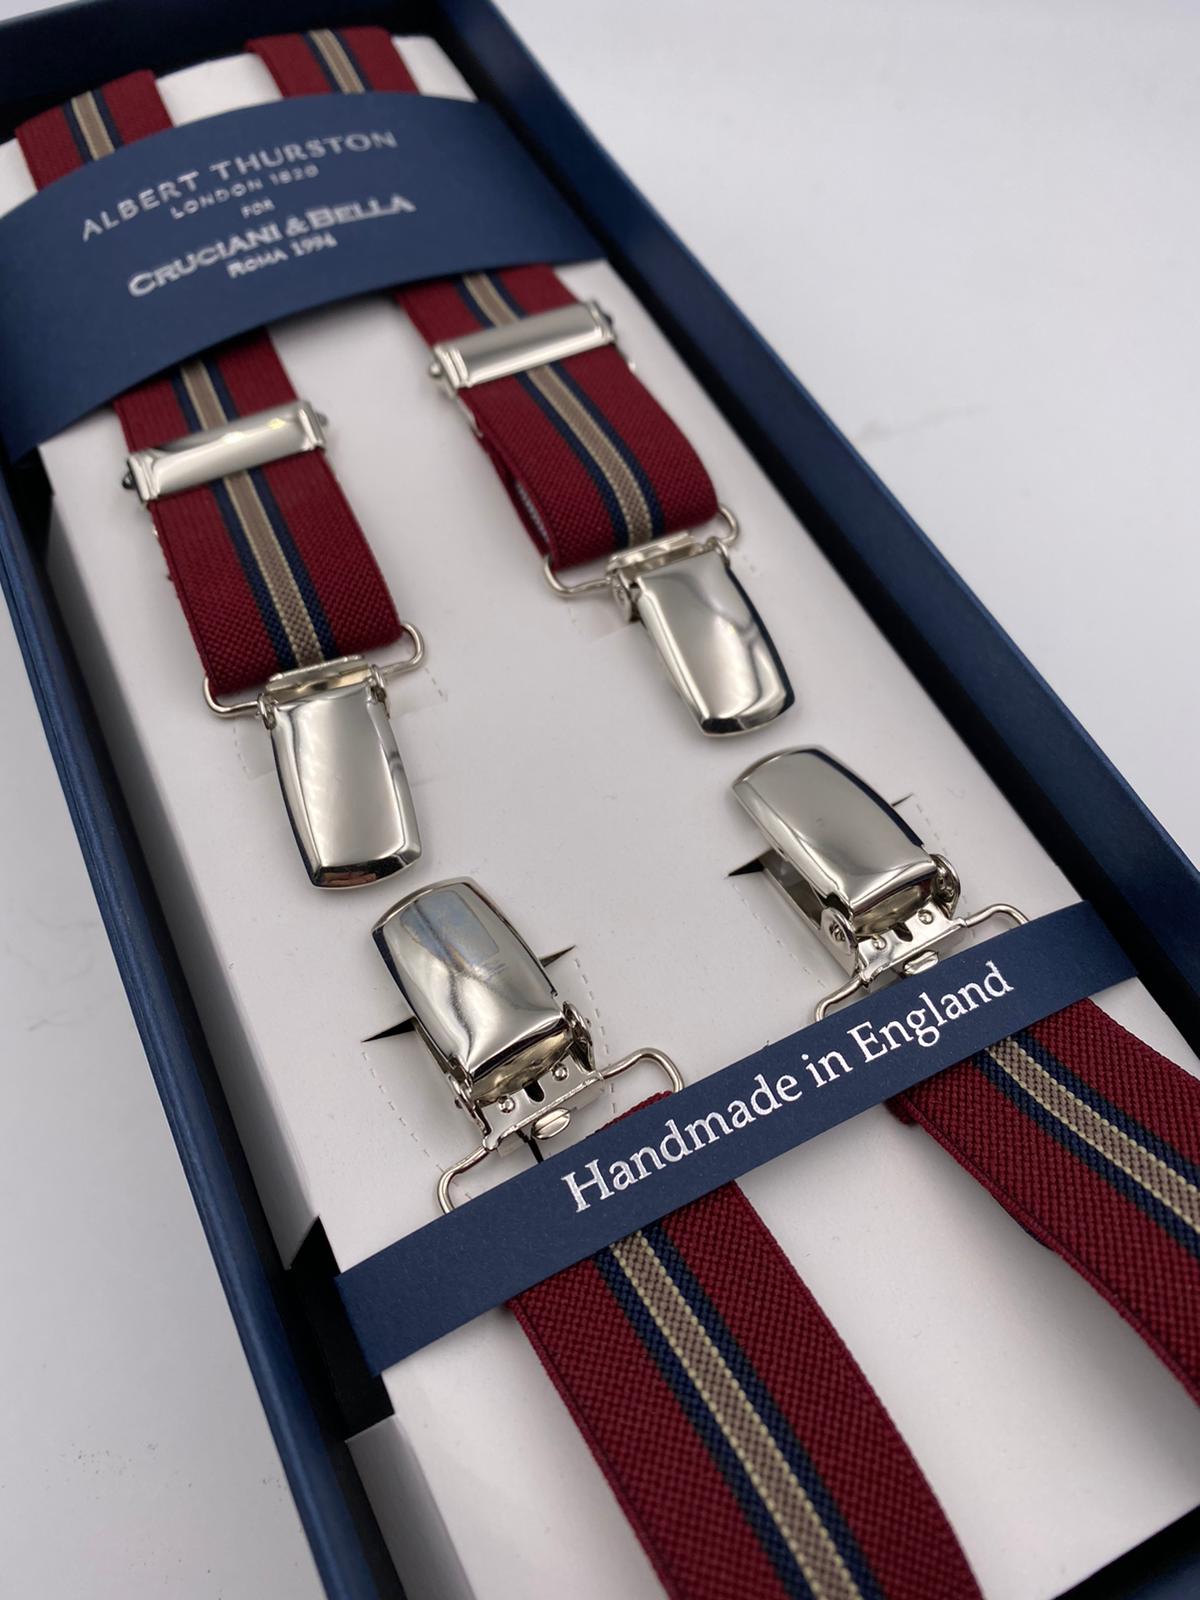 Albert Thurston for Cruciani & Bella Made in England Clip on Adjustable Sizing 25 mm elastic braces Bourgundy and Blue Stripes X-Shaped Nickel Fittings Size: L #4860